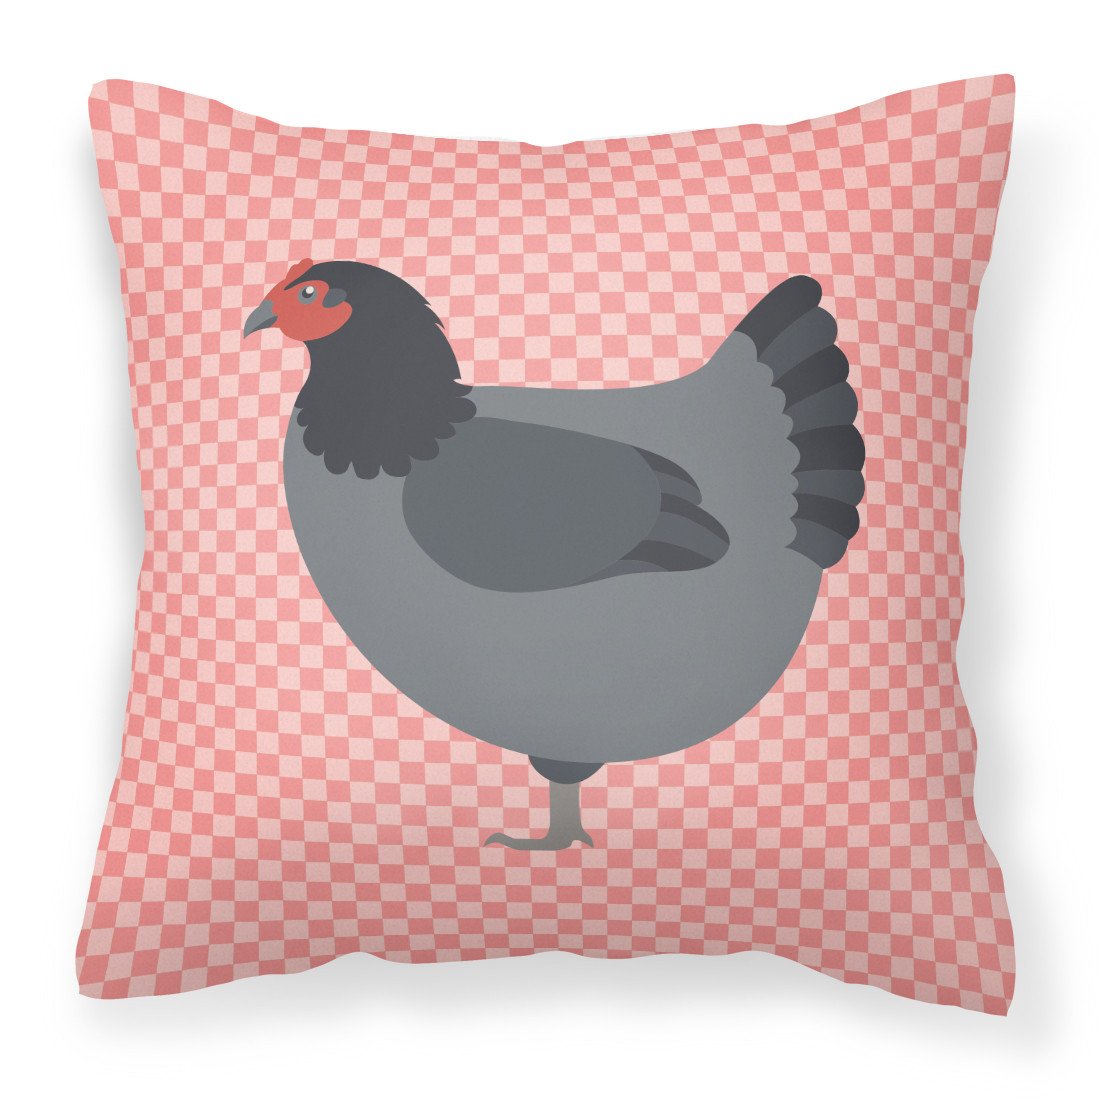 Jersey Giant Chicken Pink Check Fabric Decorative Pillow BB7835PW1818 by Caroline's Treasures